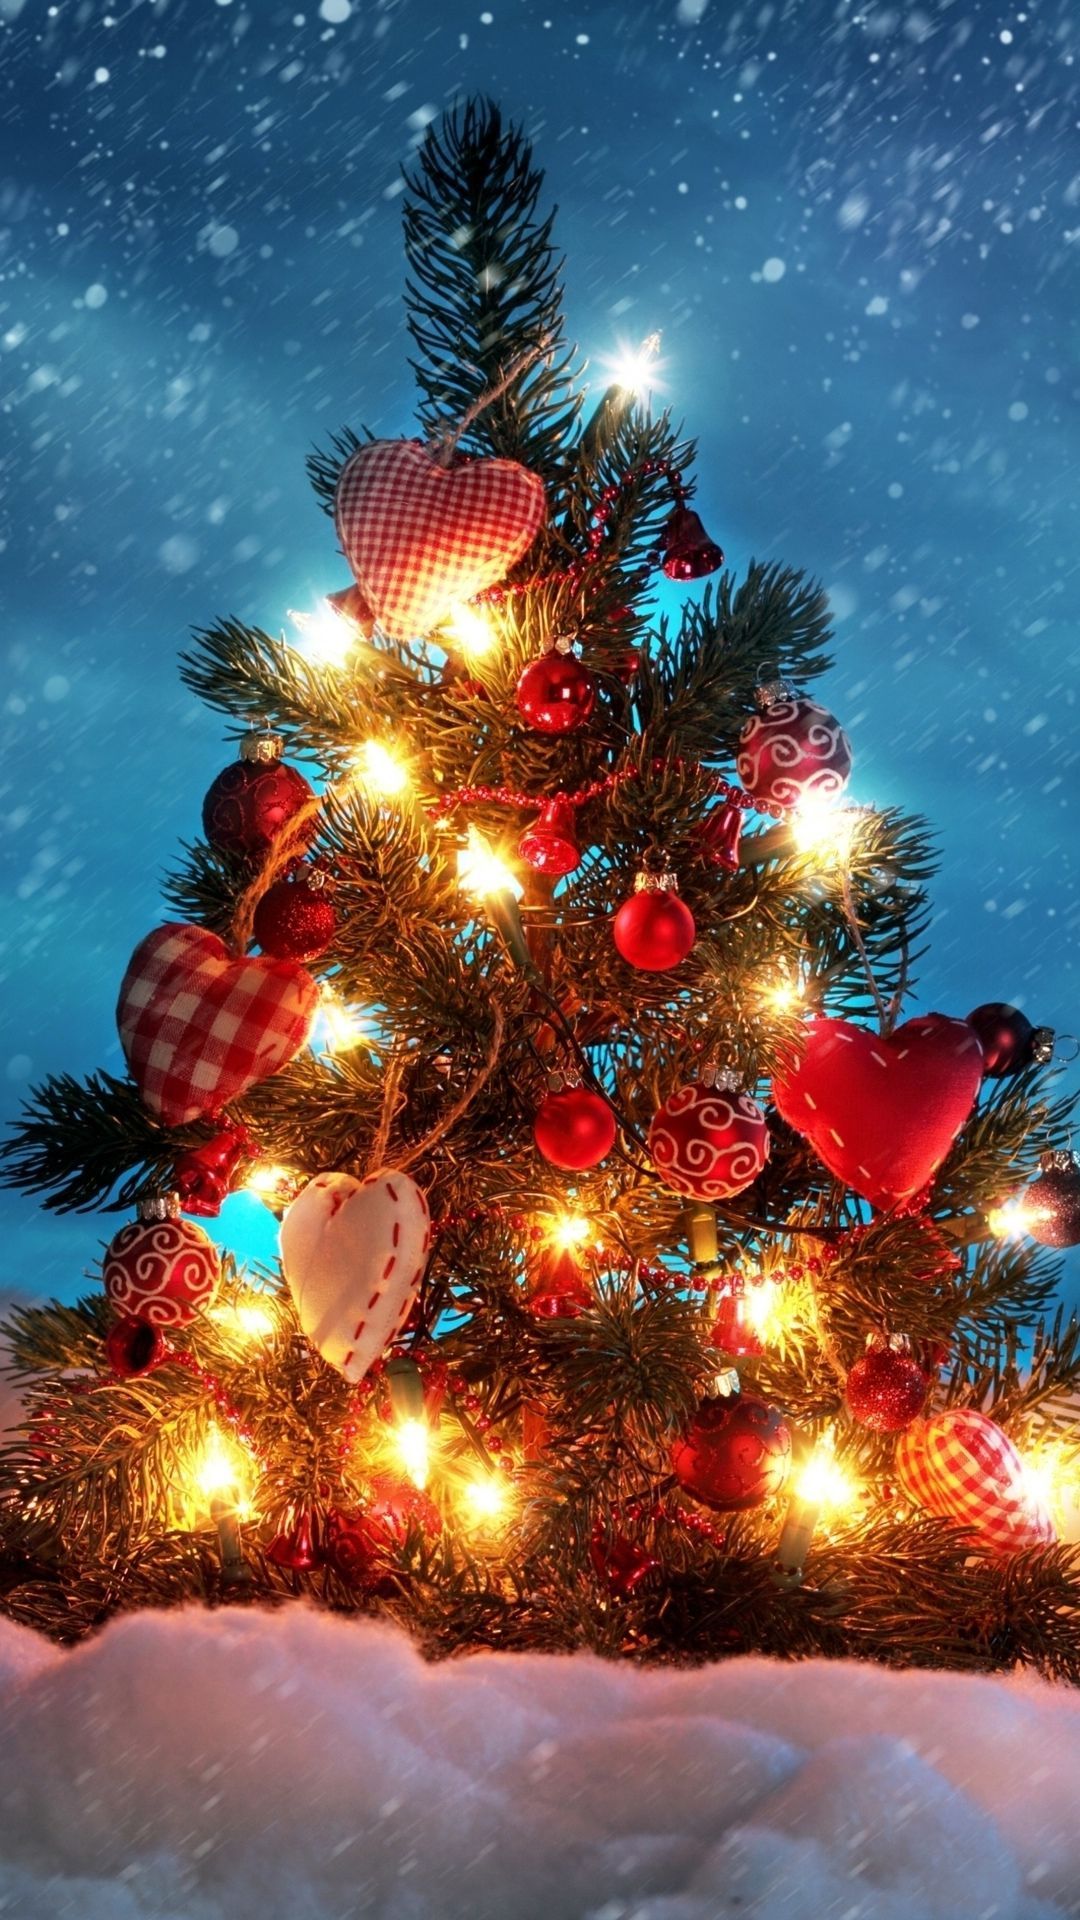 Colorful Christmas Tree. Wallpaper iphone christmas, Christmas live wallpaper, Xmas wallpaper